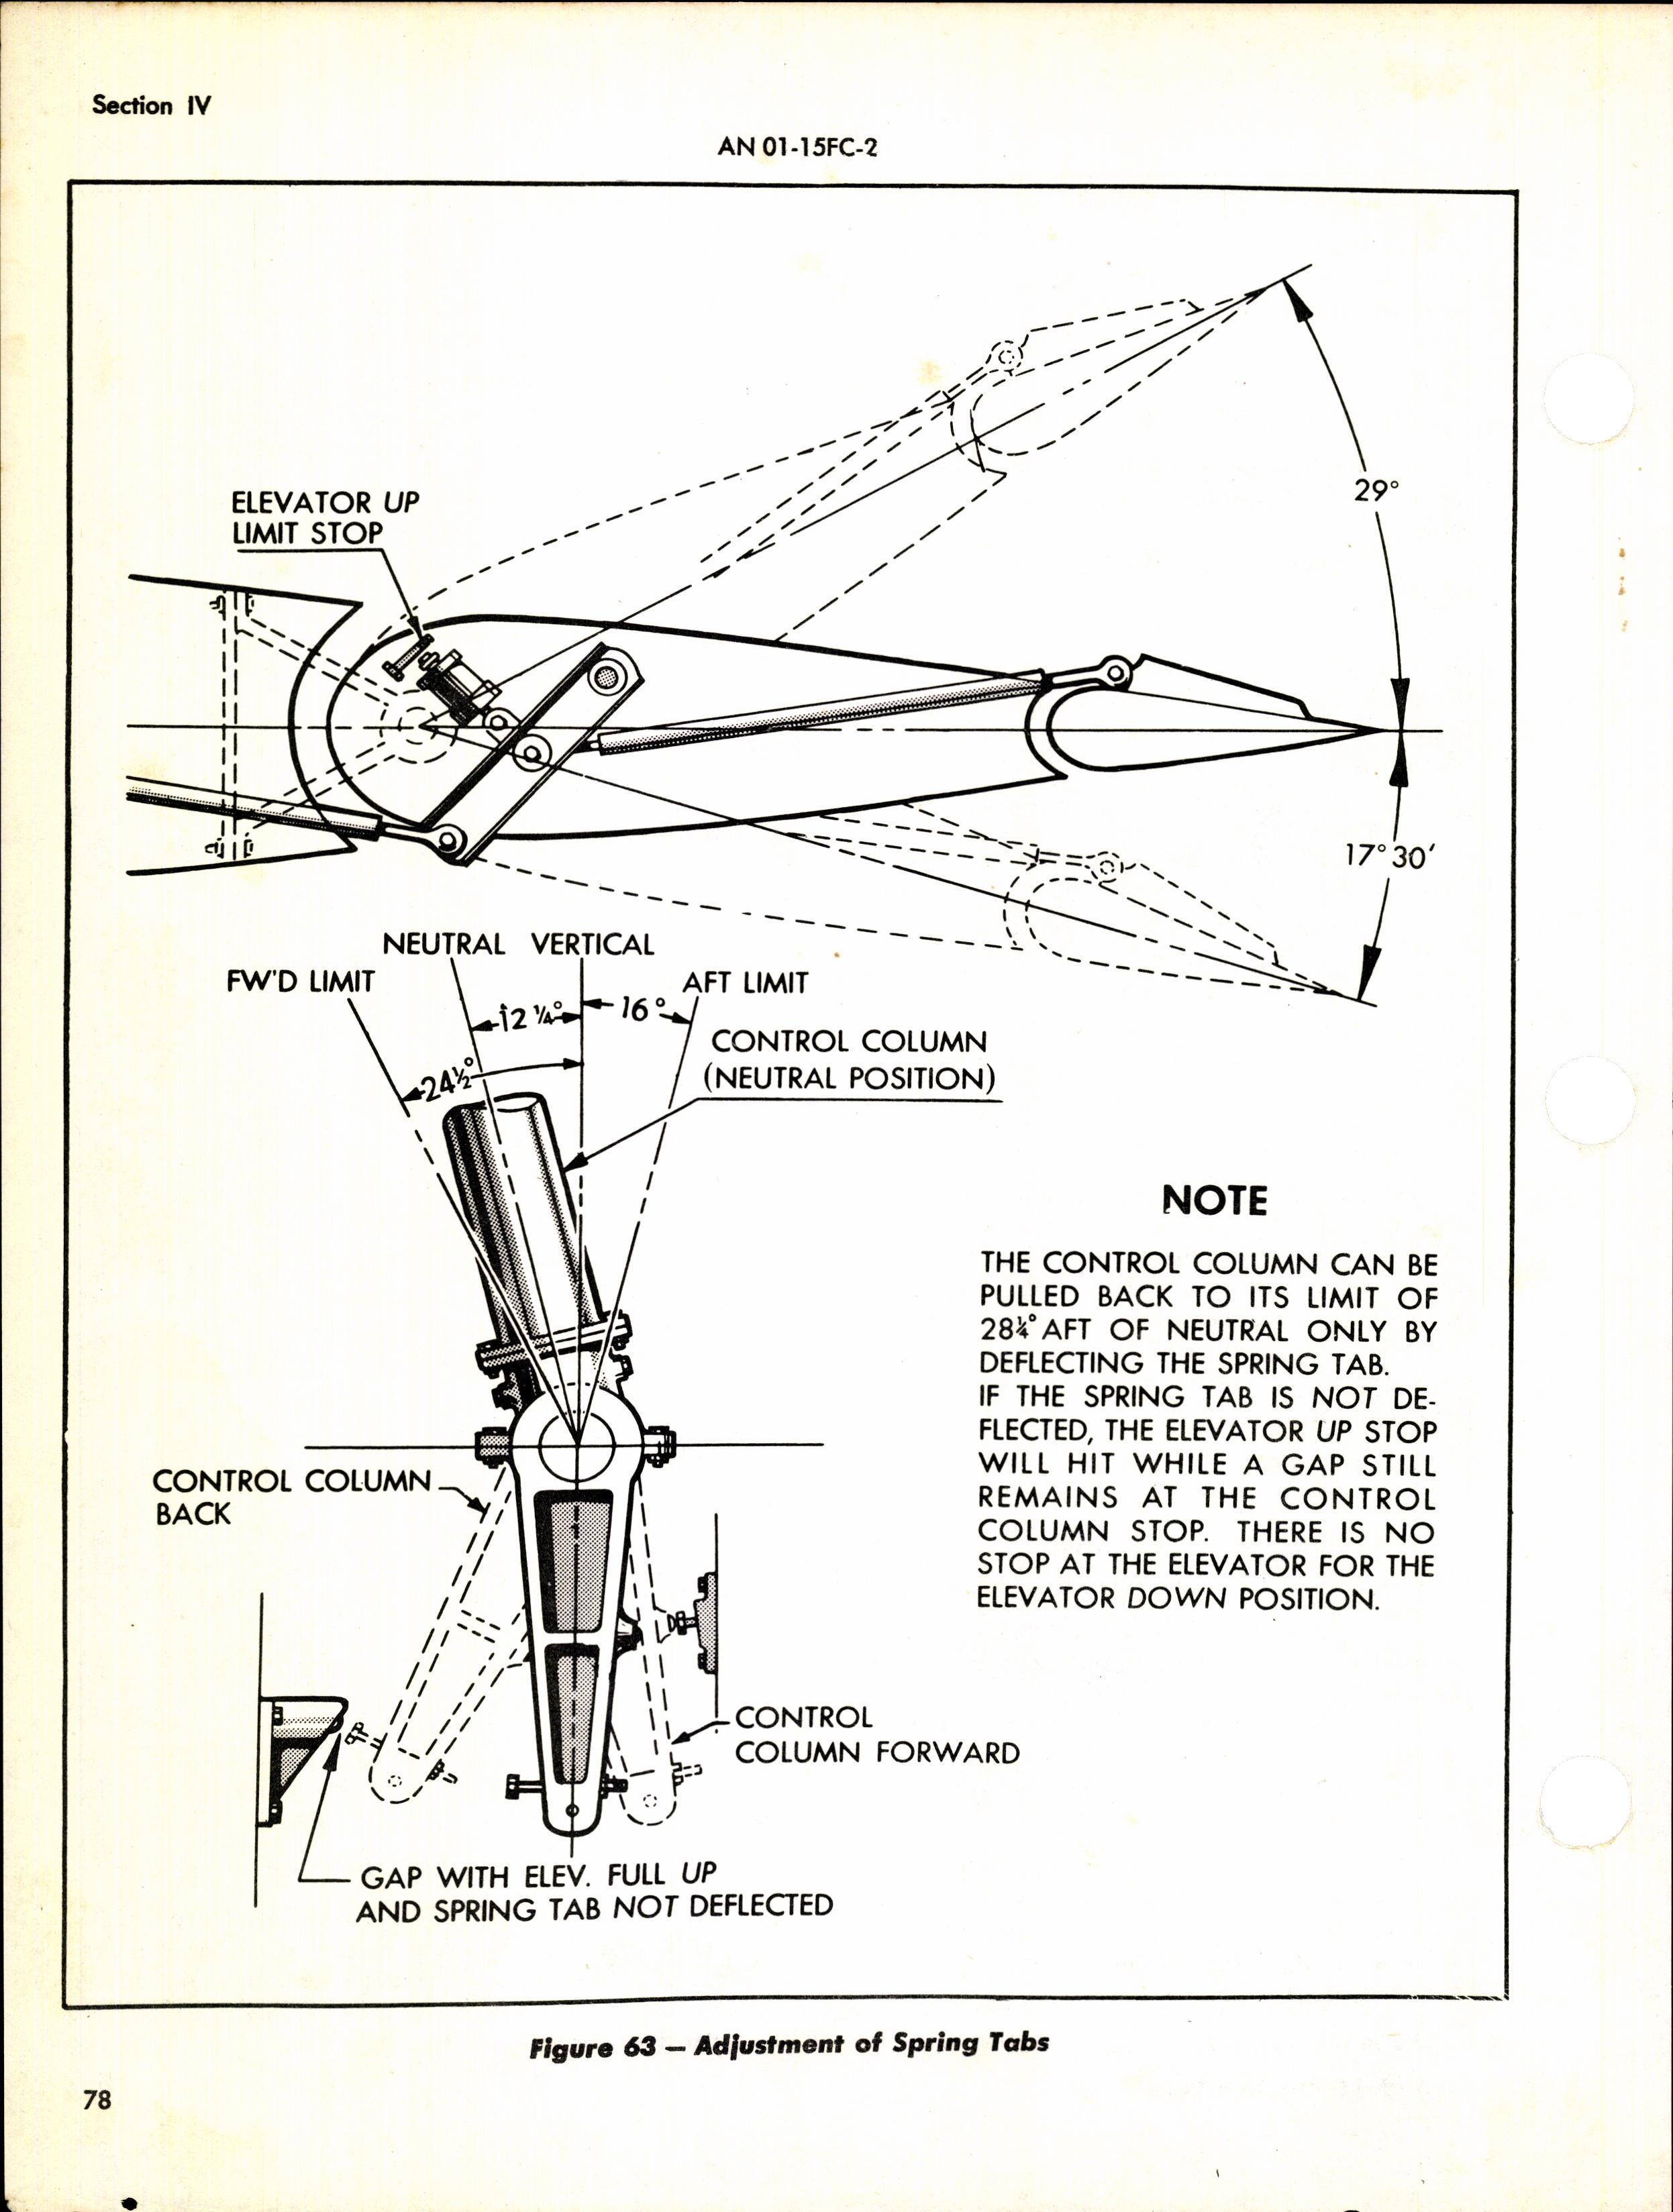 Sample page 4 from AirCorps Library document: Erection and Maintenance Instructions for P-61C Airplanes